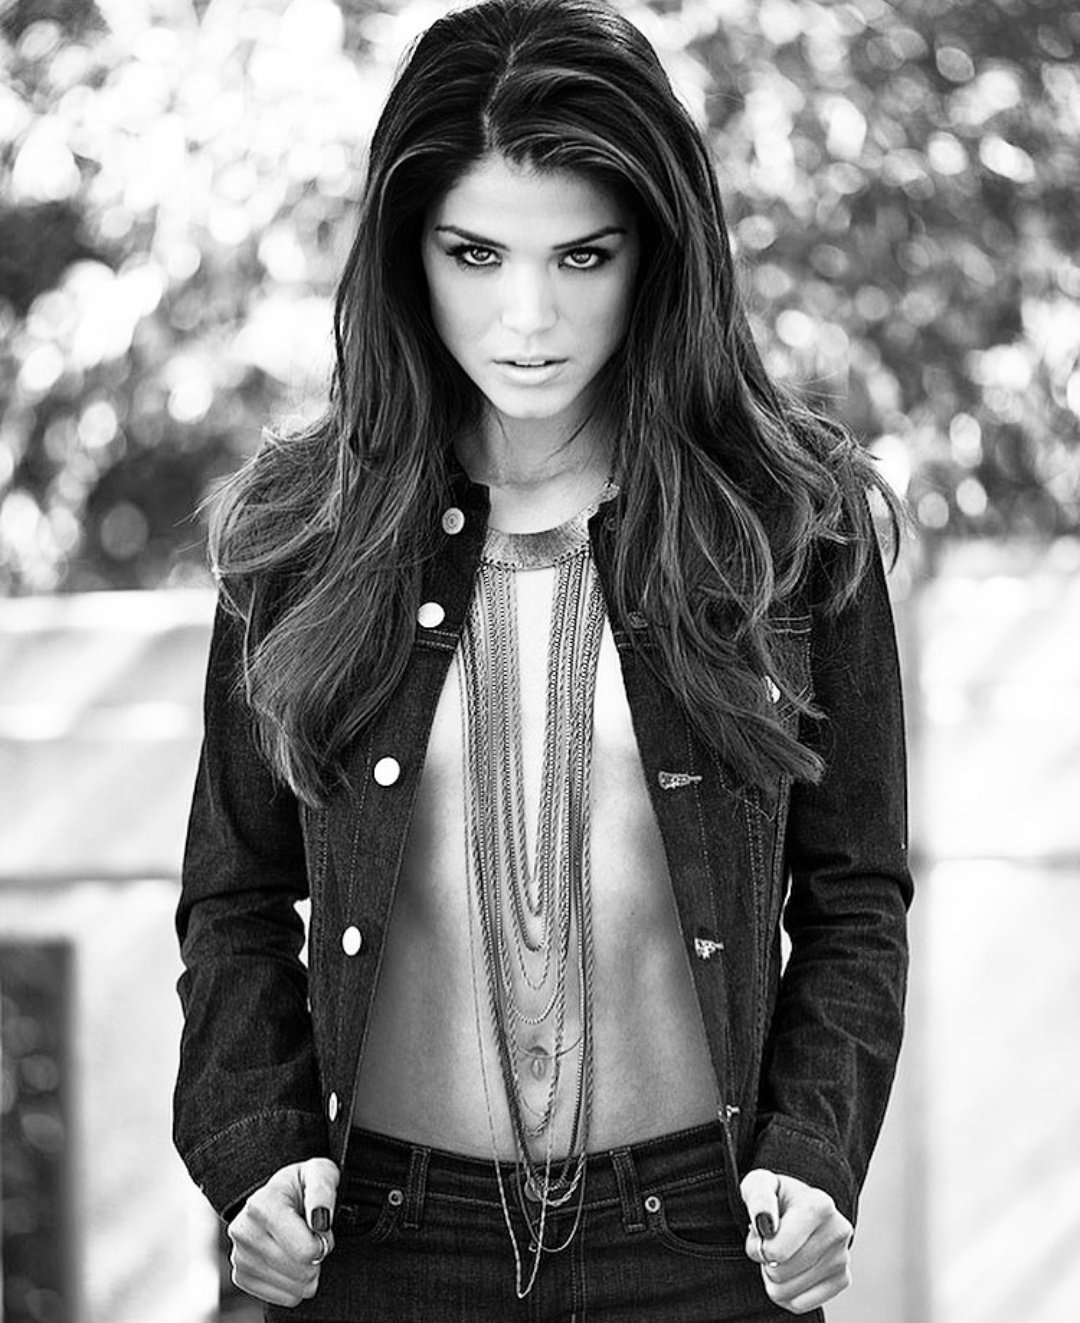 Marie avgeropoulos hot pics